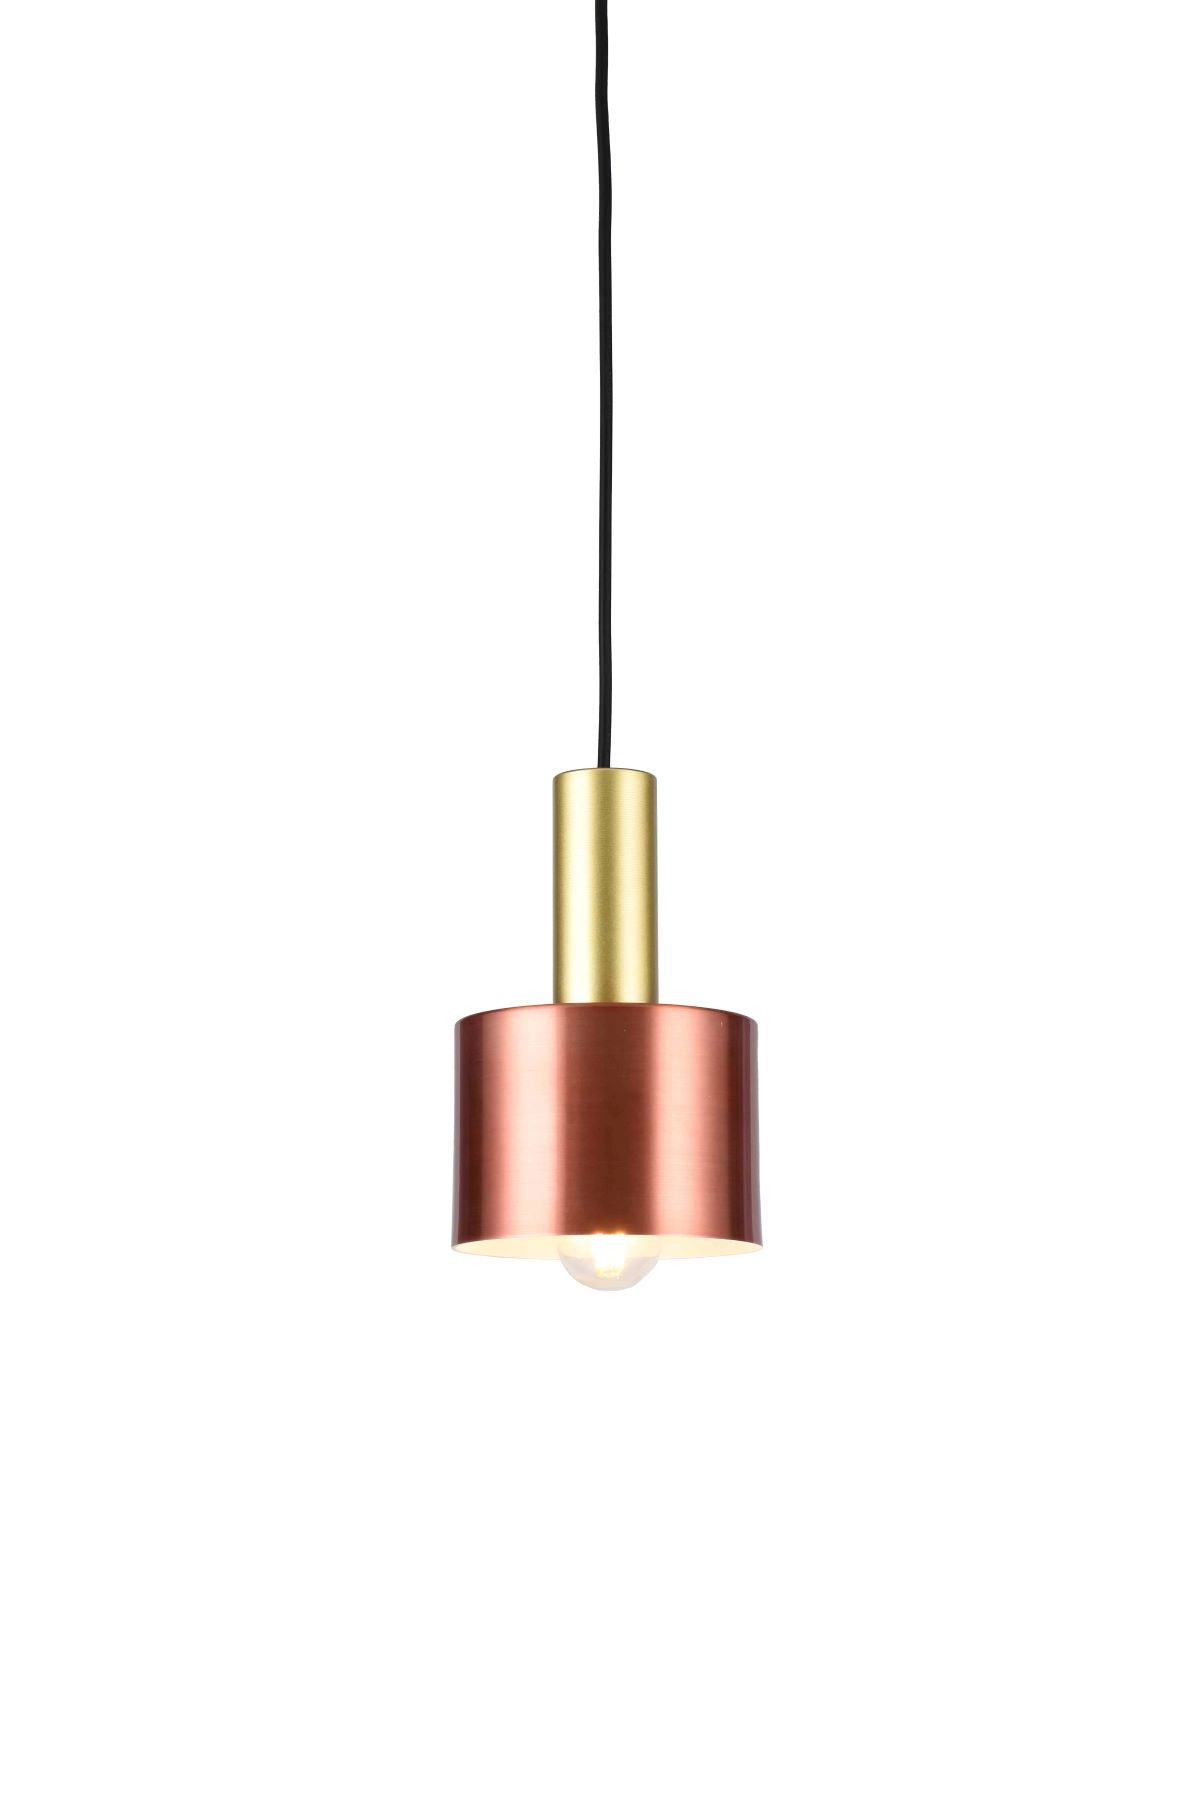 Our Selvia pendant light is a stylish addition suitable for every room, its metal copper  dome shape shade with contrasting gold lamp holder creates an amazing feature on any ceiling. The lamp looks great with a filament light bulb, especially in industrial and modern interiors.